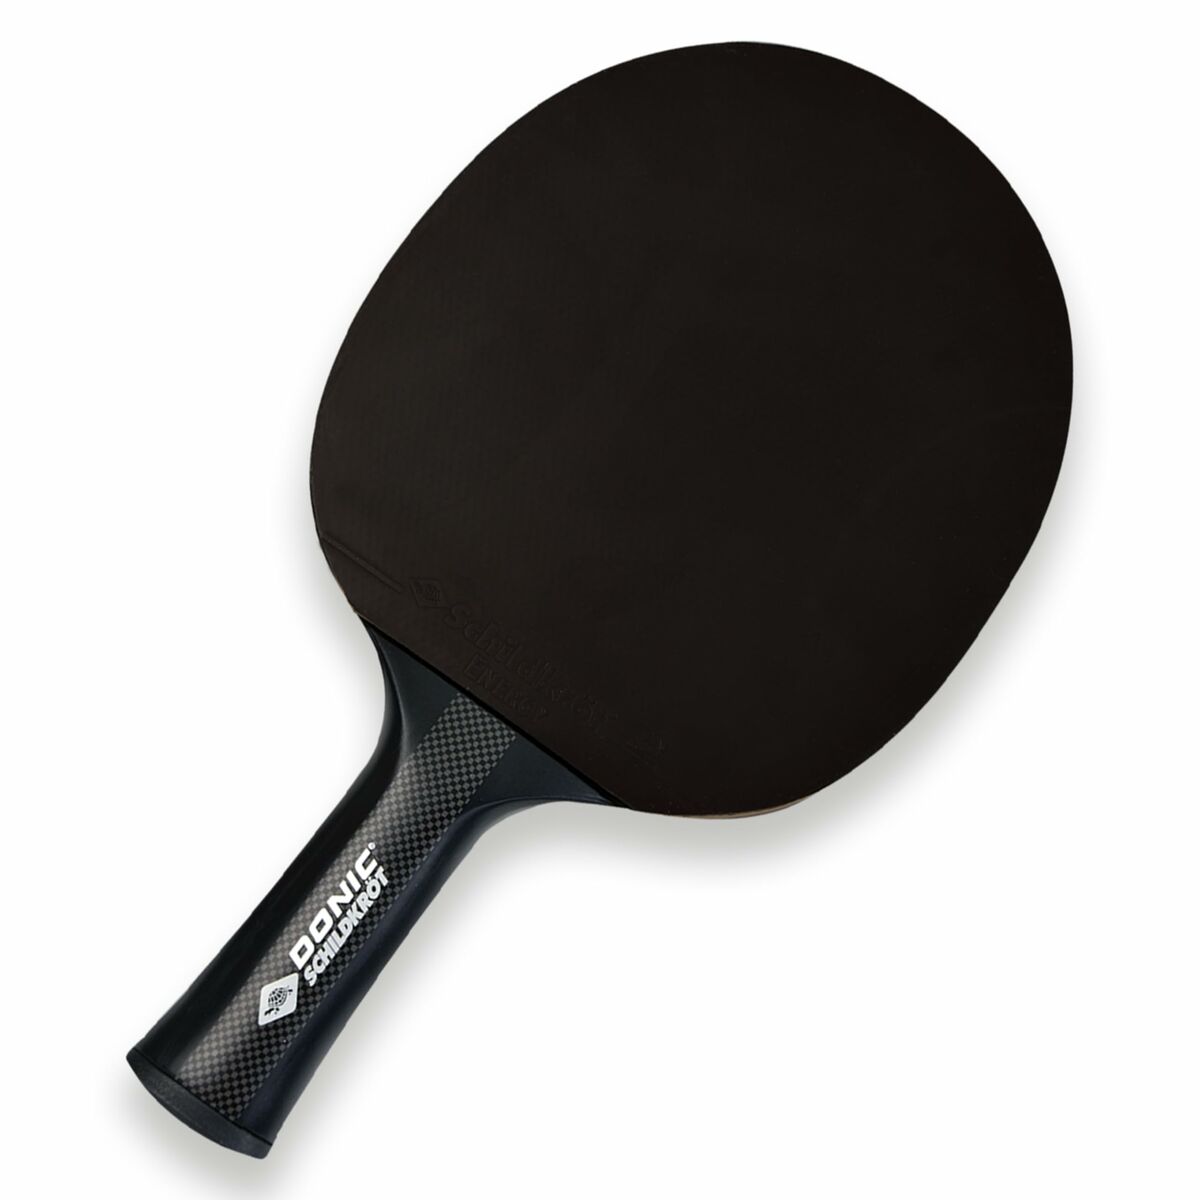 Ping Pong Racket Donic CarboTec 3000